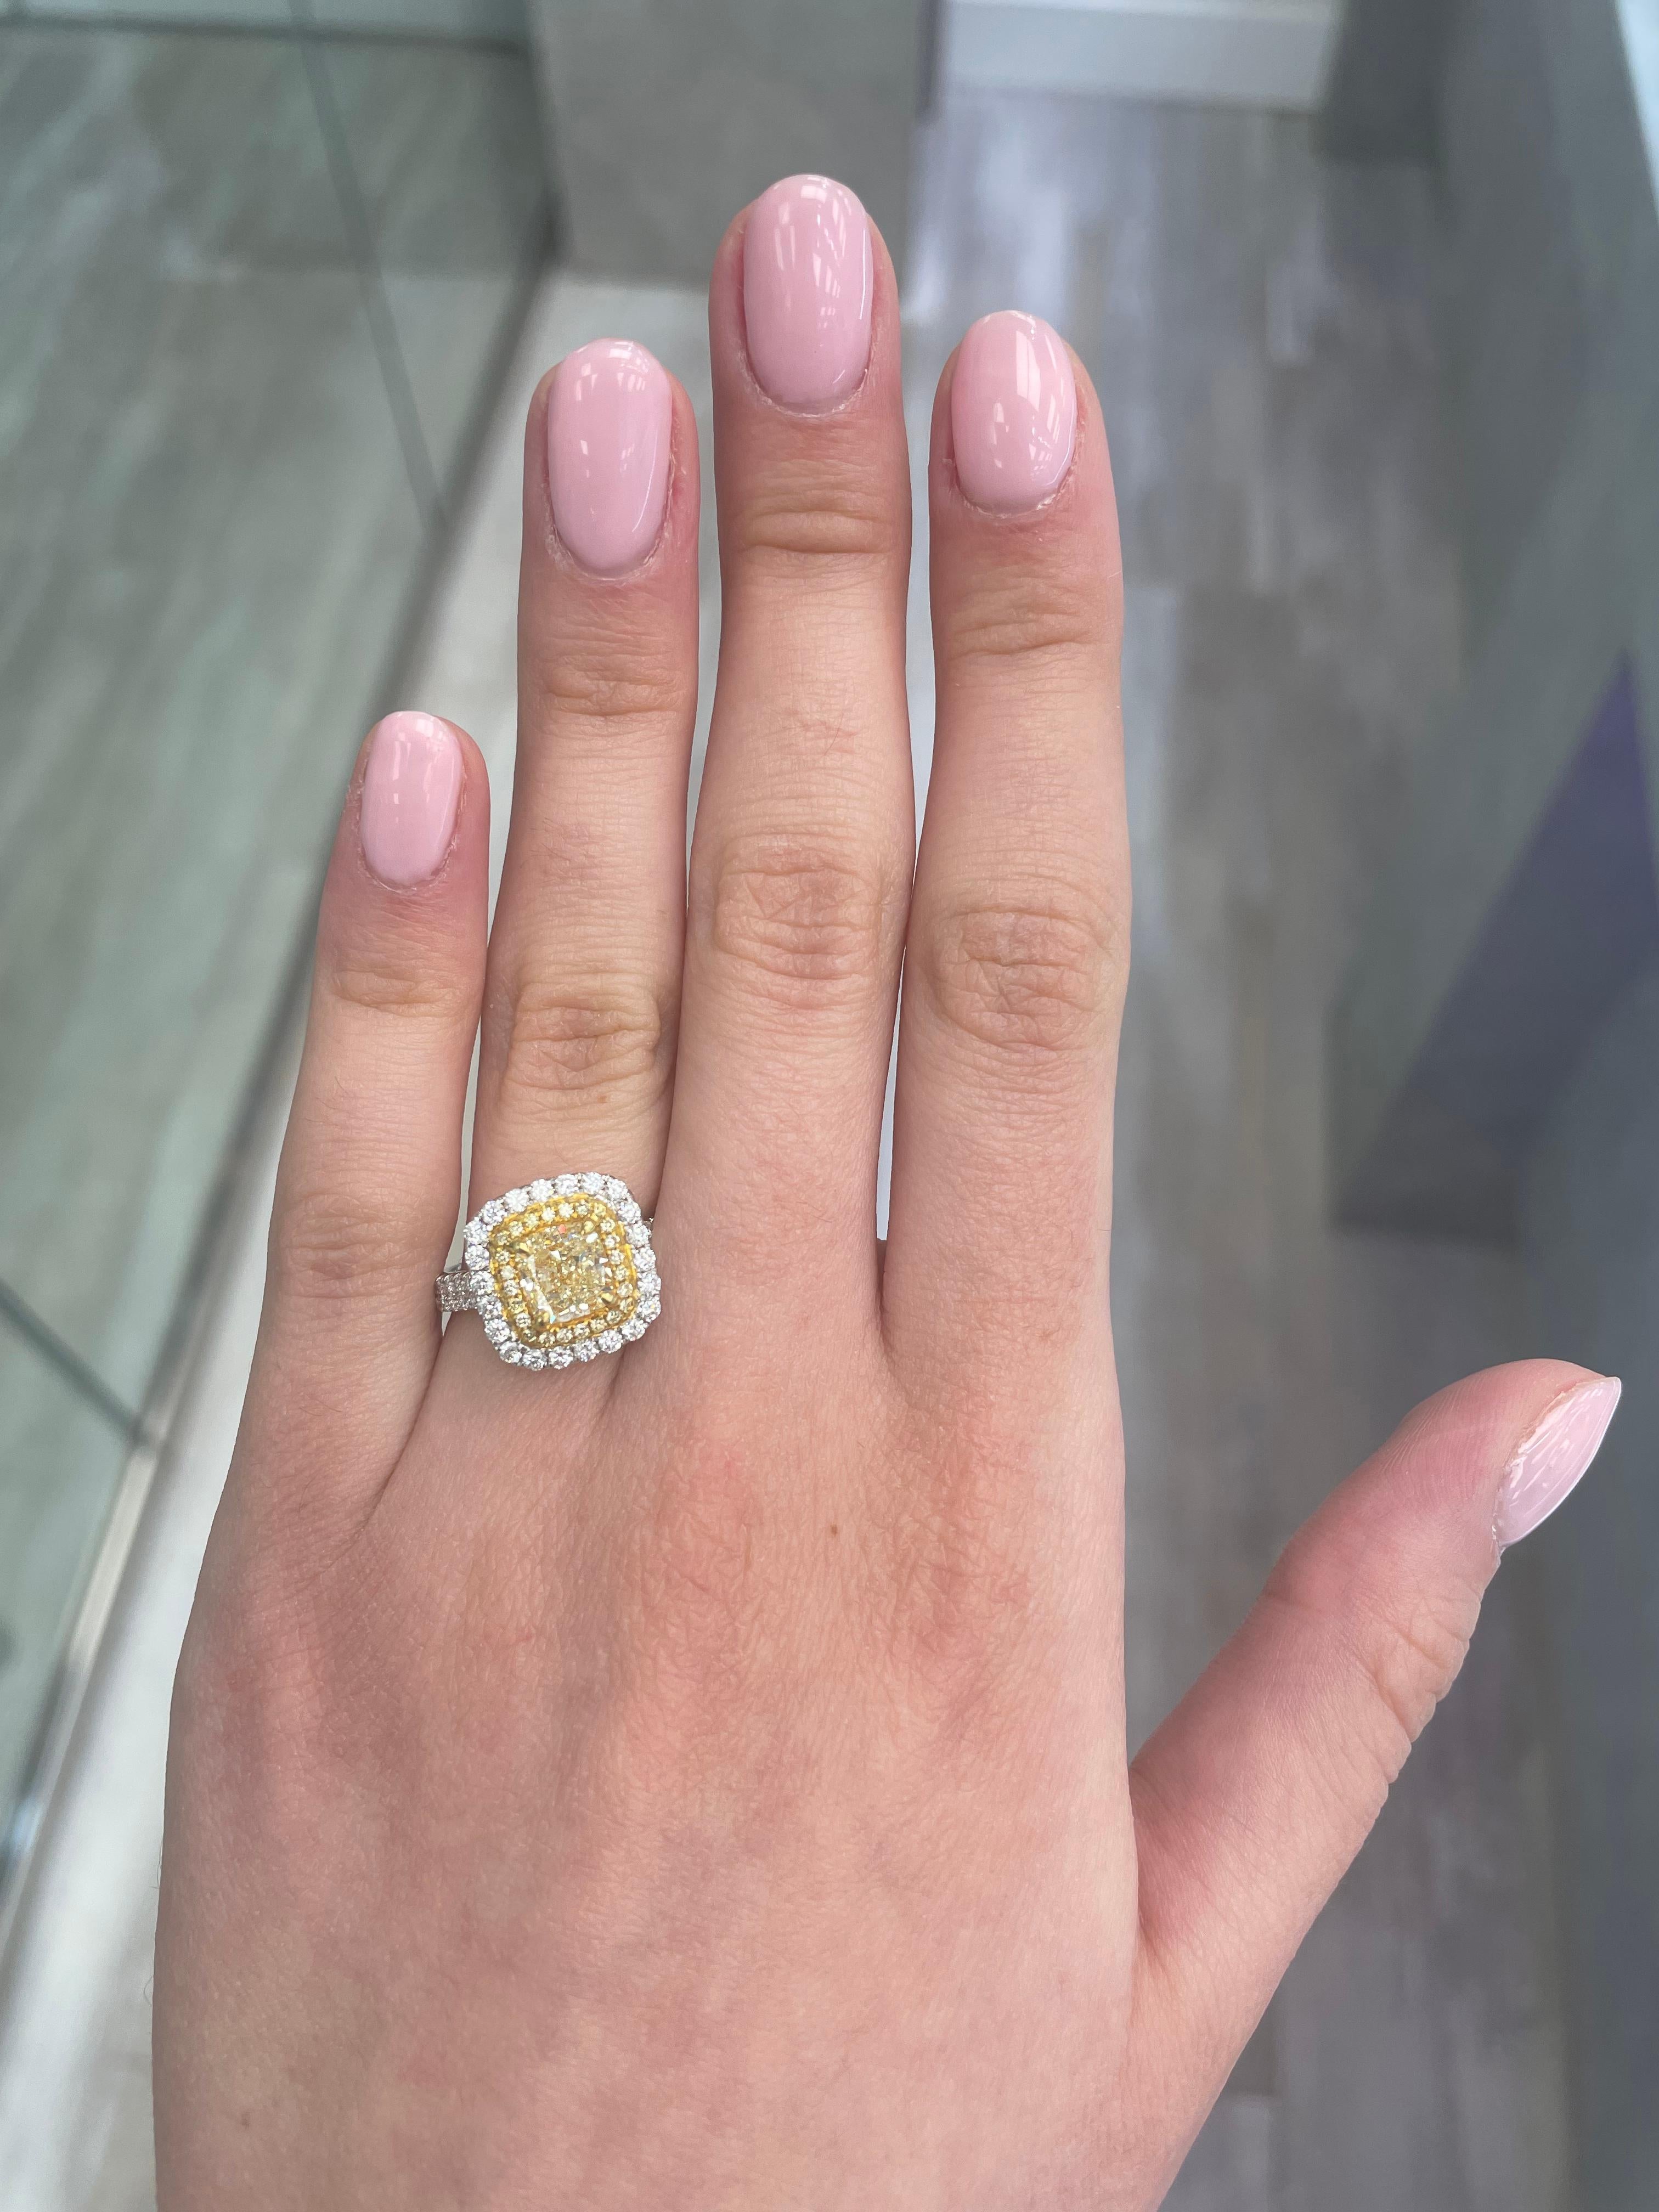 Stunning modern EGL certified yellow diamond double halo ring, two-tone 18k yellow and white gold, split shank. By Alexander Beverly Hills.
2.45 carats total diamond weight.
1.65 carat cushion cut Fancy Yellow color and VS2 clarity diamond, EGL